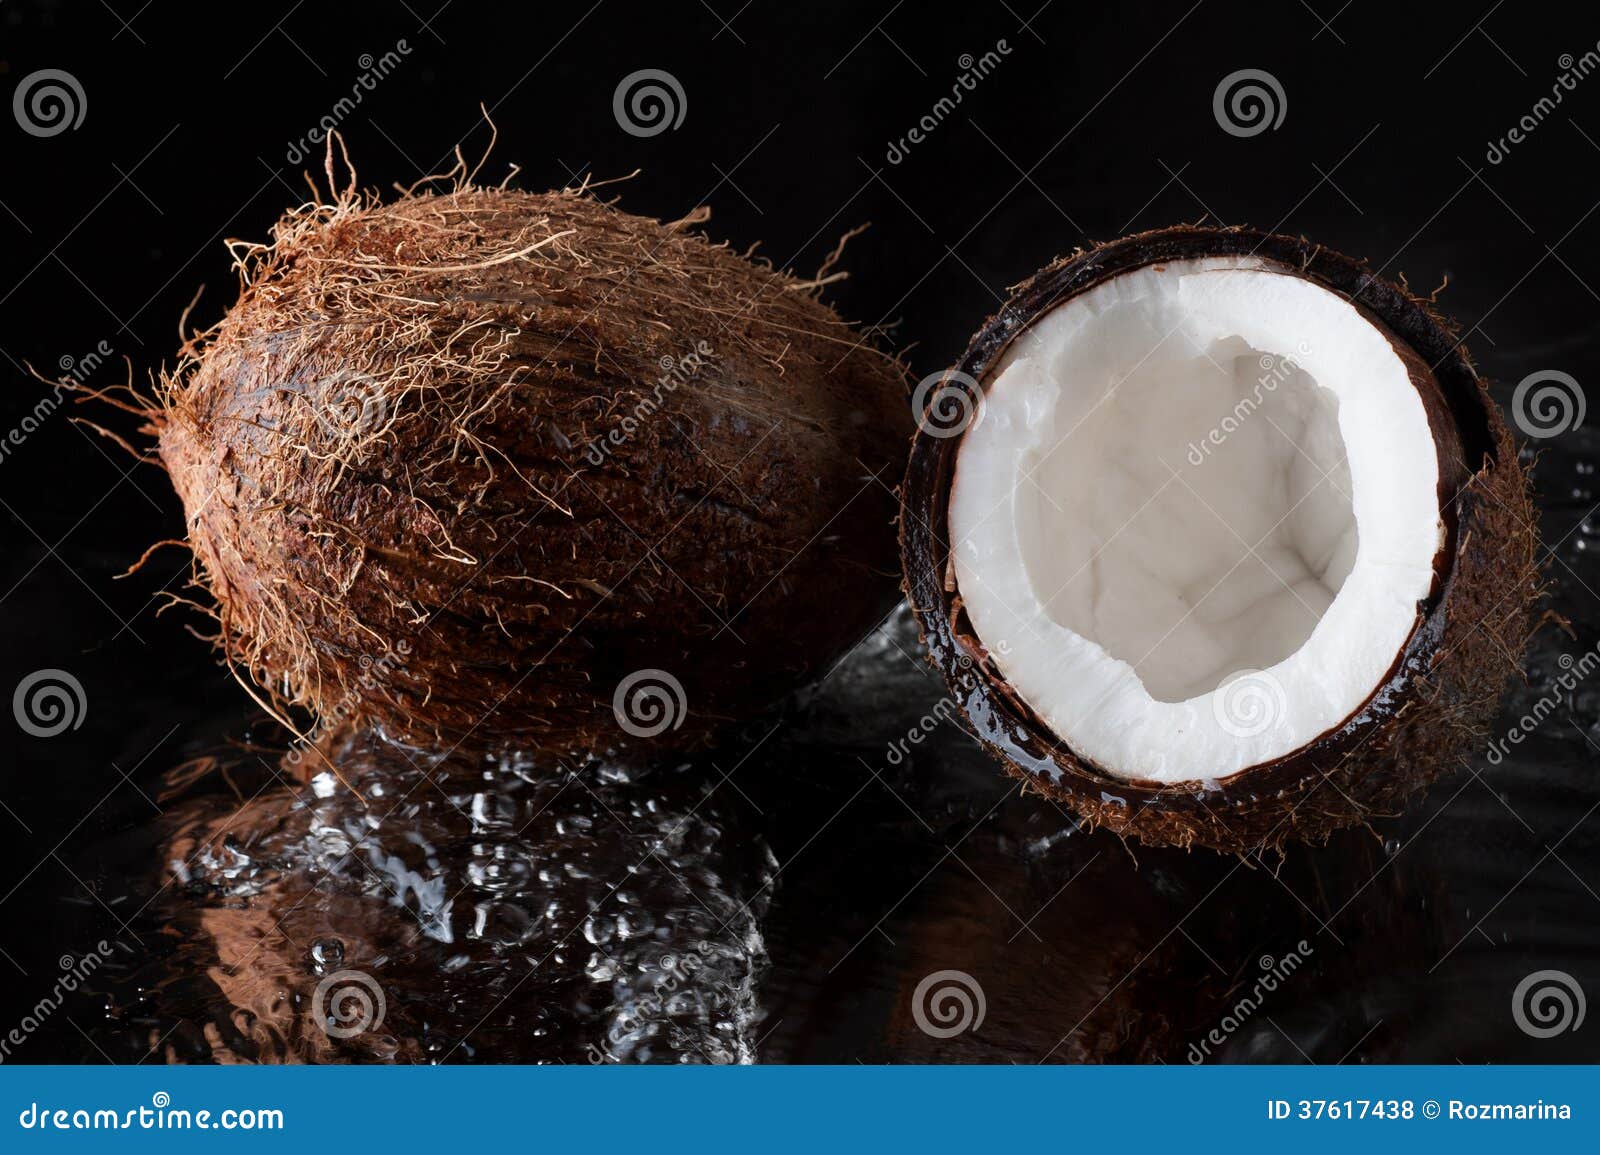 Cracked Coconut on a Black Background Stock Photo - Image of summer ...